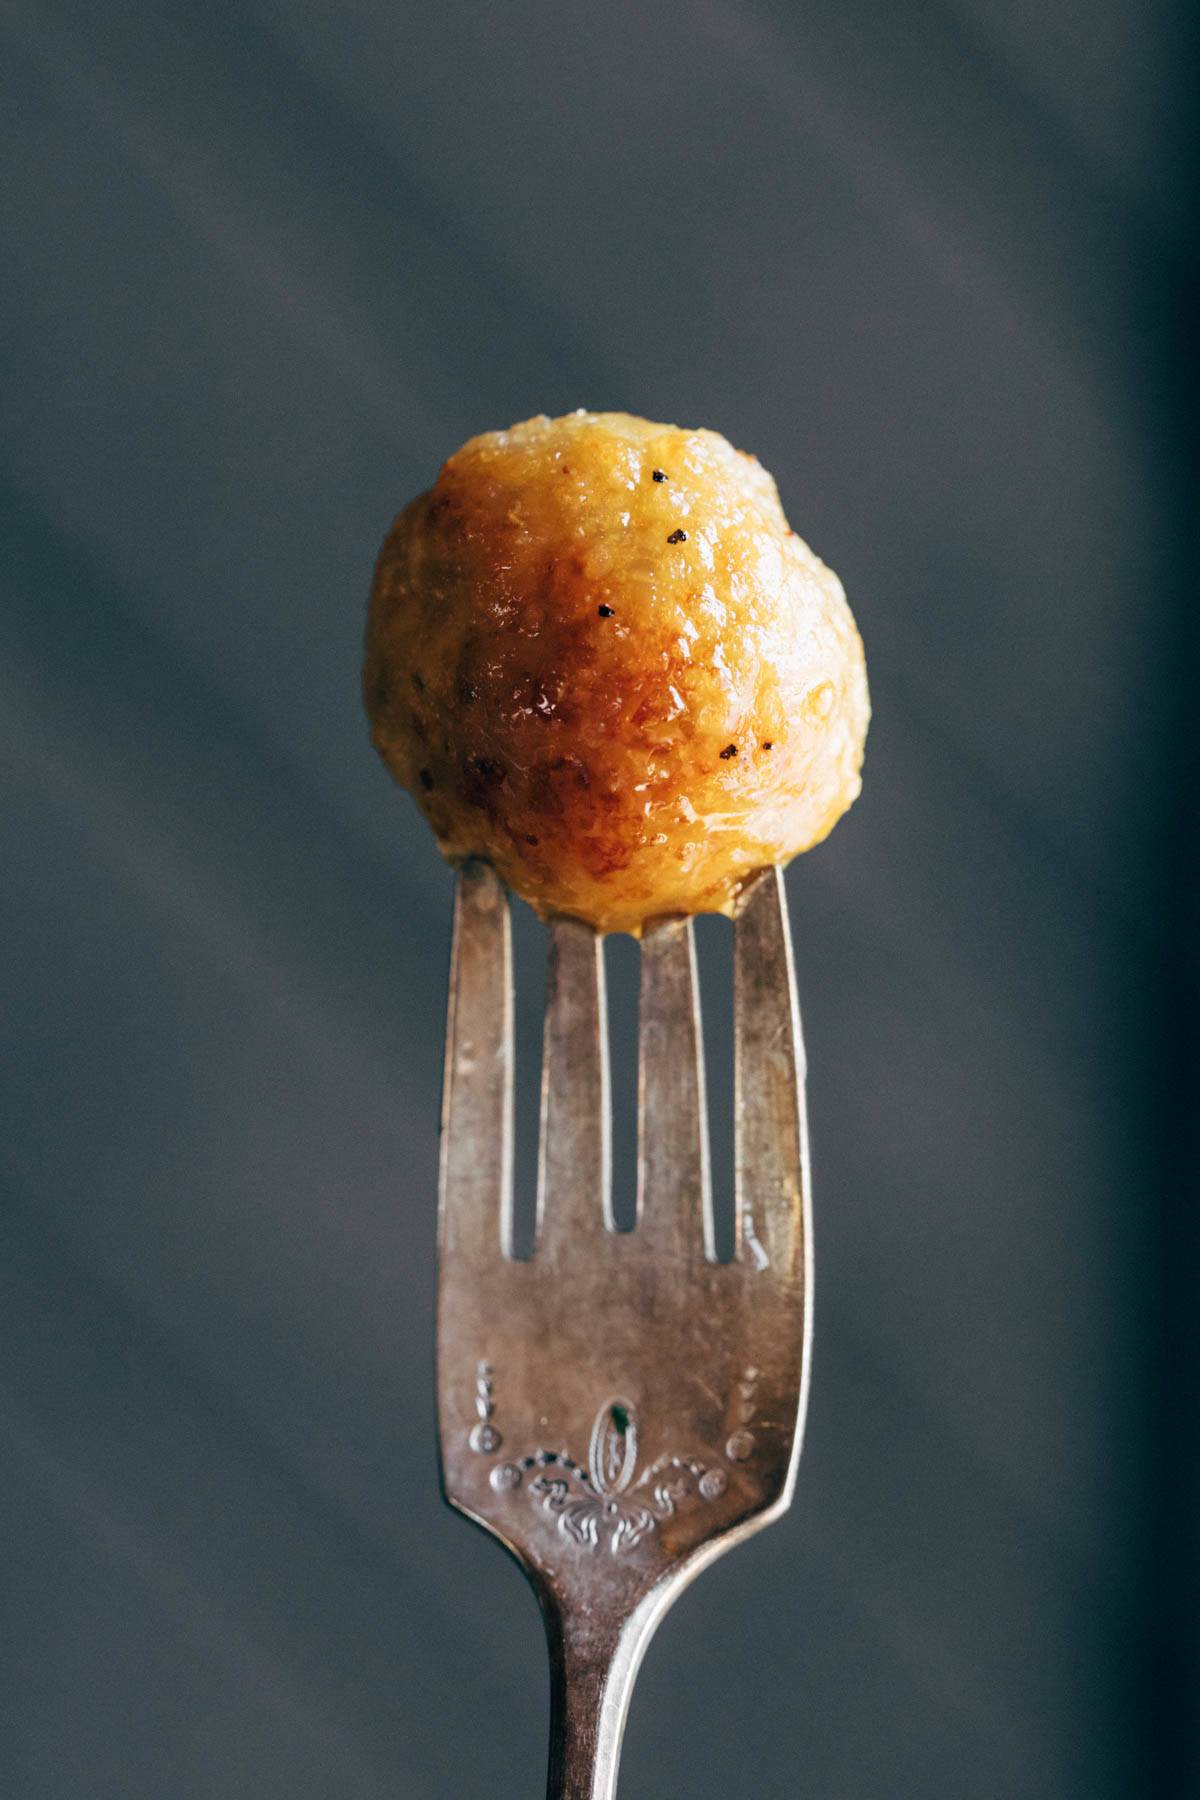 Baked Chicken Meatball on a fork.